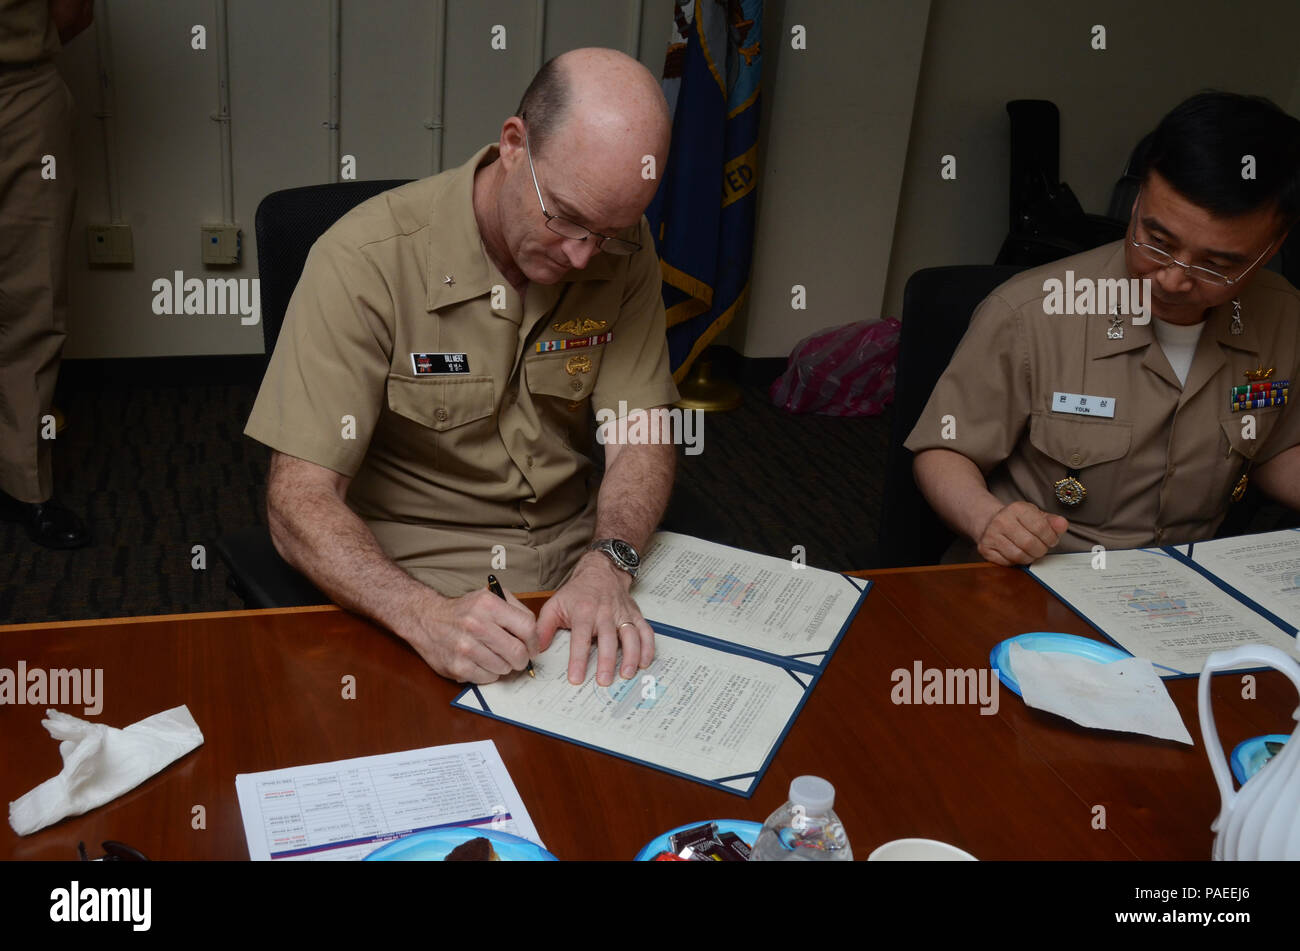 160331-N-YM720-263 SANTA RITA, Guam (March 31, 2016) Rear Adm. William Merz, commander, Submarine Group 7, left, and Rear Adm. Youn Jeong Sang, commander, Submarine Force, Republic of Korea Navy (ROKN), sign a formal agreement at the conclusion of the 43rd Submarine Warfare Committee Meeting (SWCM) reaffirming the longstanding relationship between the two countries and pledging continued support between the two submarine forces. SWCM is a bilateral discussion between the U.S. and ROKN submarine forces designed to foster the partnership and focuses on submarine tactics, force integraton and fut Stock Photo